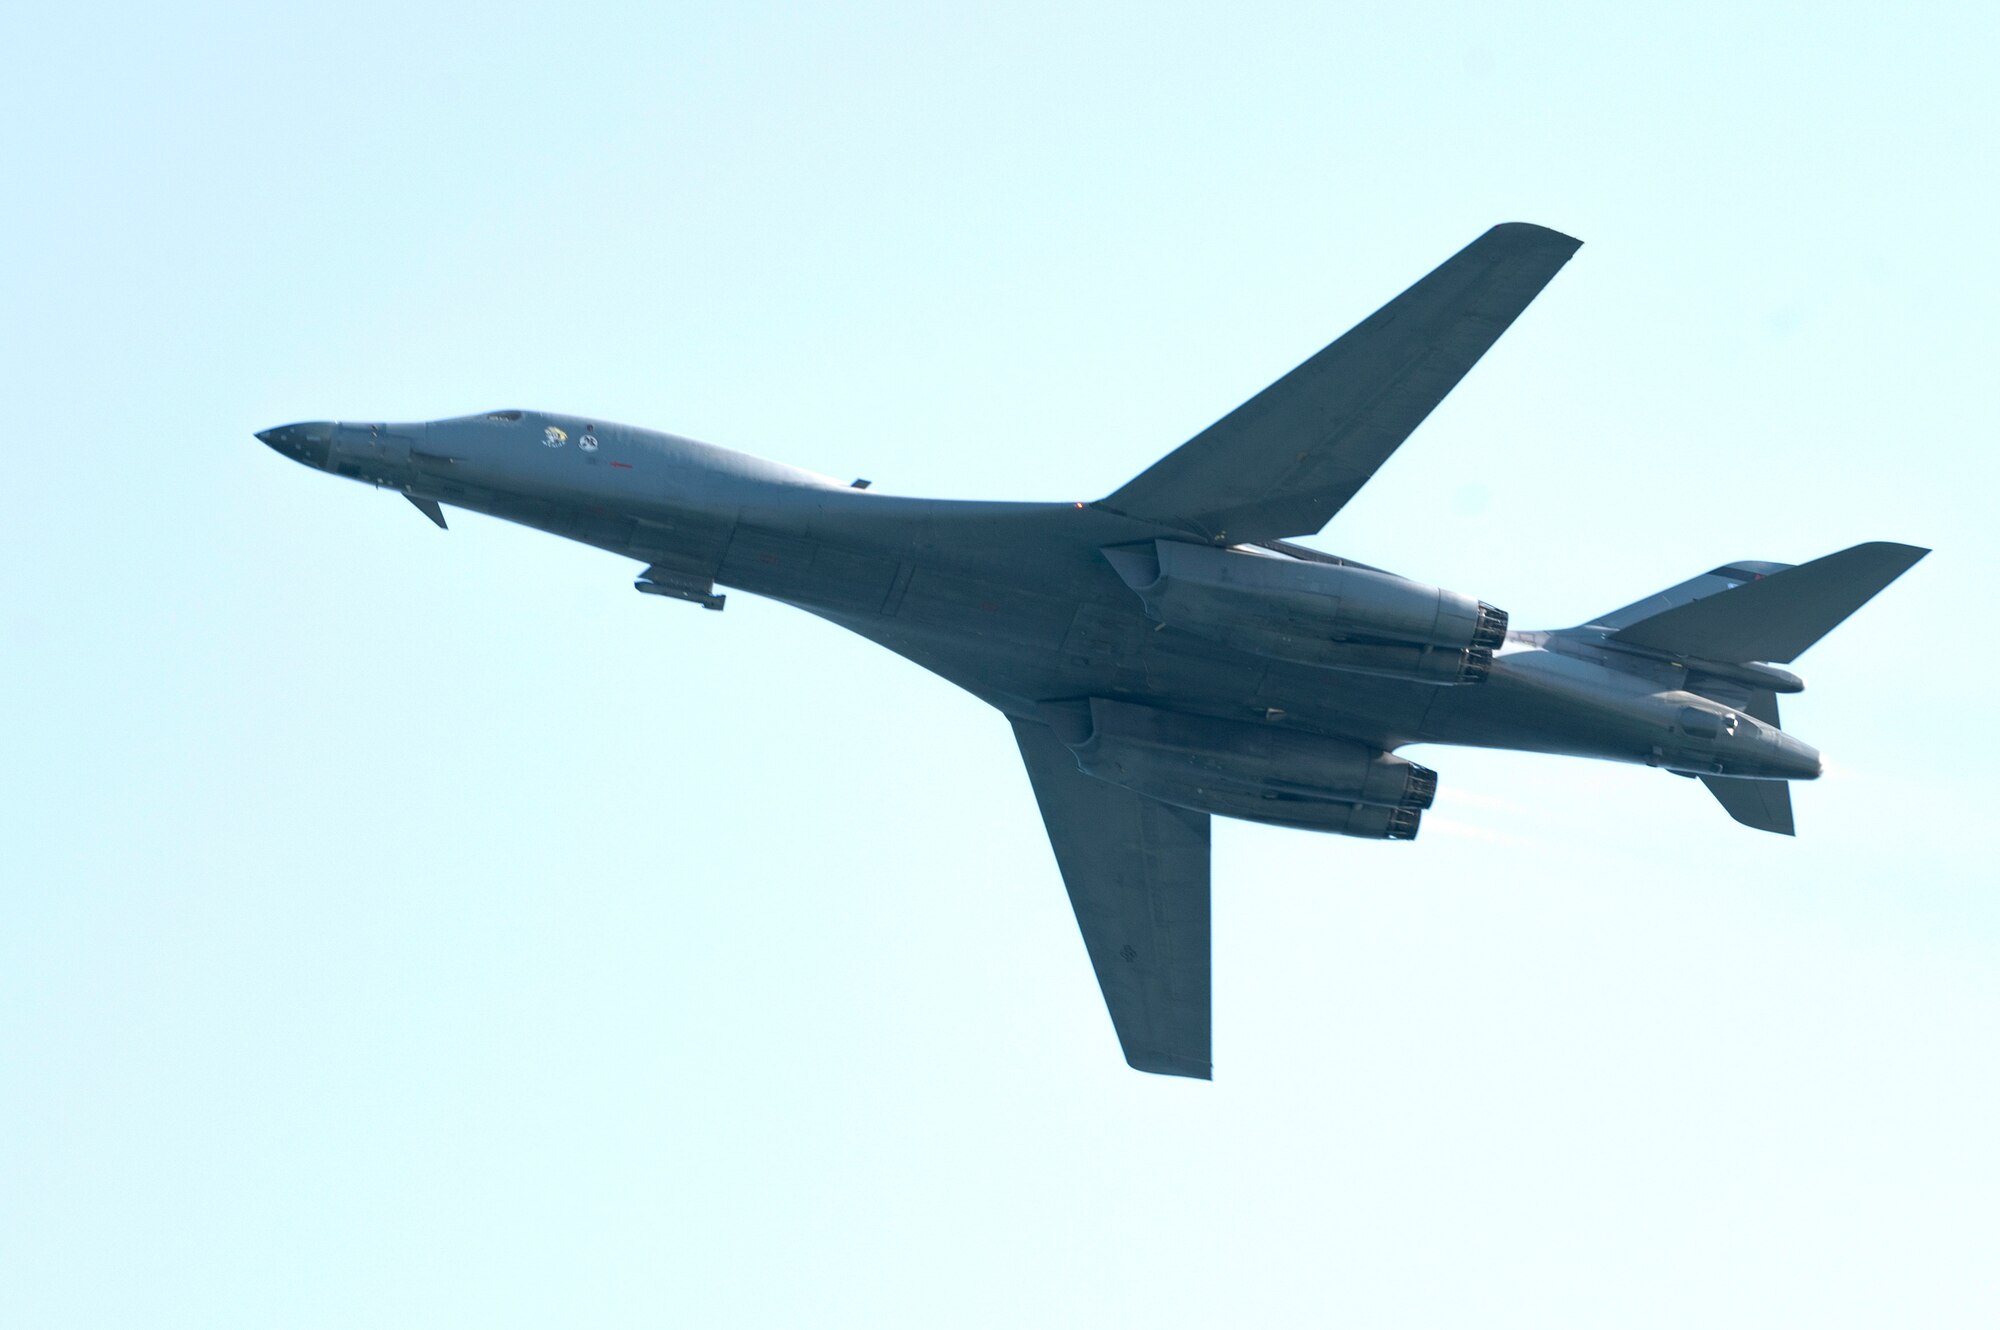 A B-1 Lancer assigned to the 34th and 37th Bomb Squadrons, Ellsworth AFB, SD, flies over during The Doolittle Raiders’ 80th Anniversary ceremony, April 18, 2022 at Okaloosa Island. U.S. Air Force Lt. Gen. Jim Slife, commander of Air Force Special Operations Command and U.S. Air Force Lt. Gen. Brad Webb, commander of Air Education and Training Command (AETC), conducted an aerial review in honor of the members of the Doolittle Raiders.